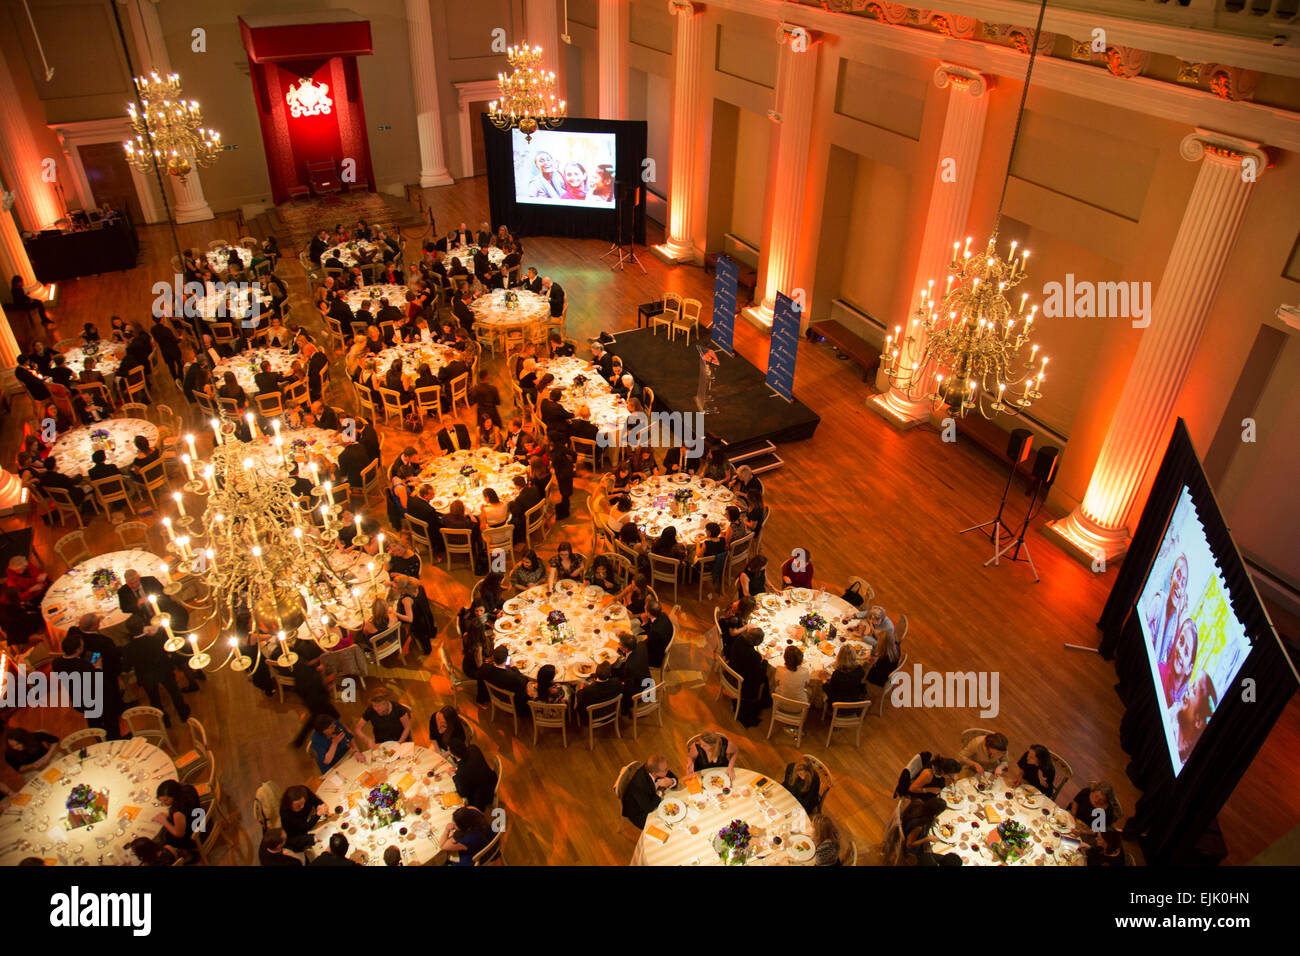 London, UK. Thursday 12th March 2015. International Centre for Research on Women, Champions for Change Awards Dinner event at Banqueting House, Whitehall. Overview of the event. Stock Photo